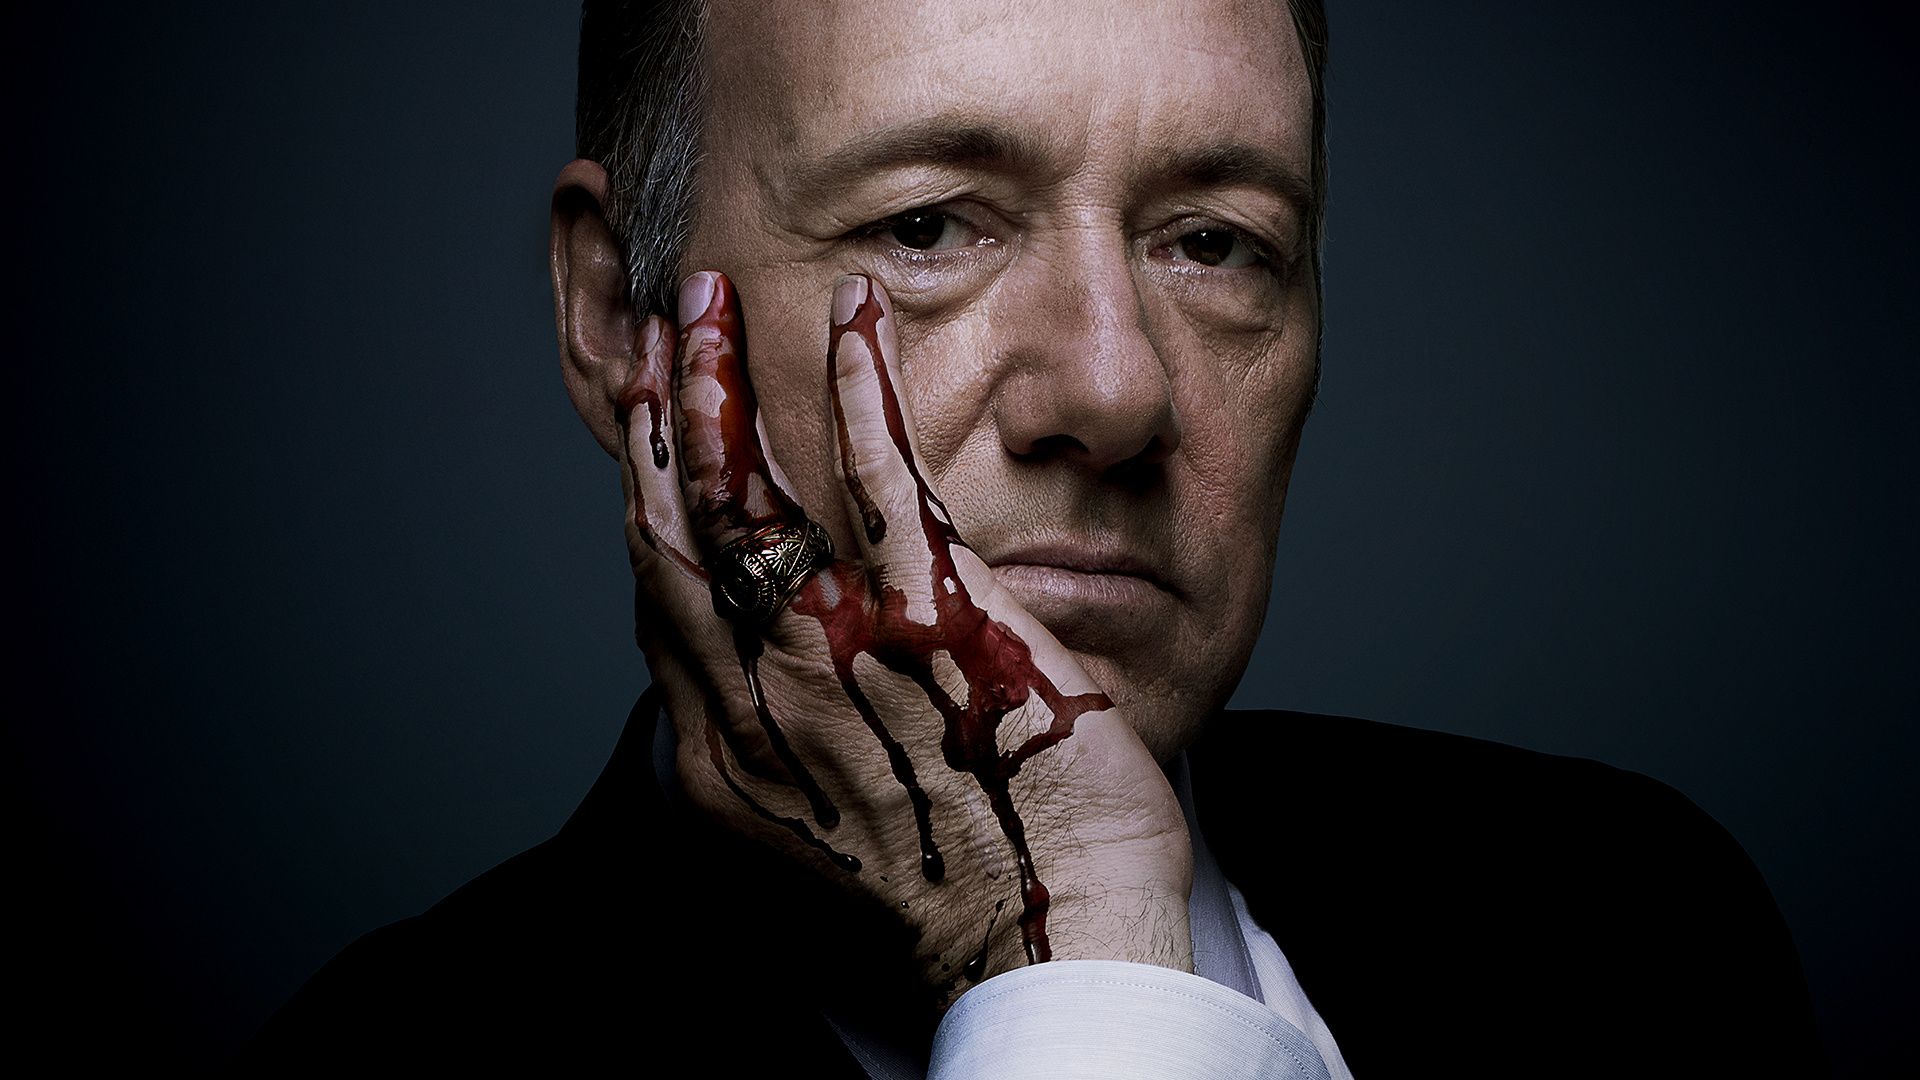 house-of-cards-temporada-2-kevin-spacey-robin-wright-slider.jpg